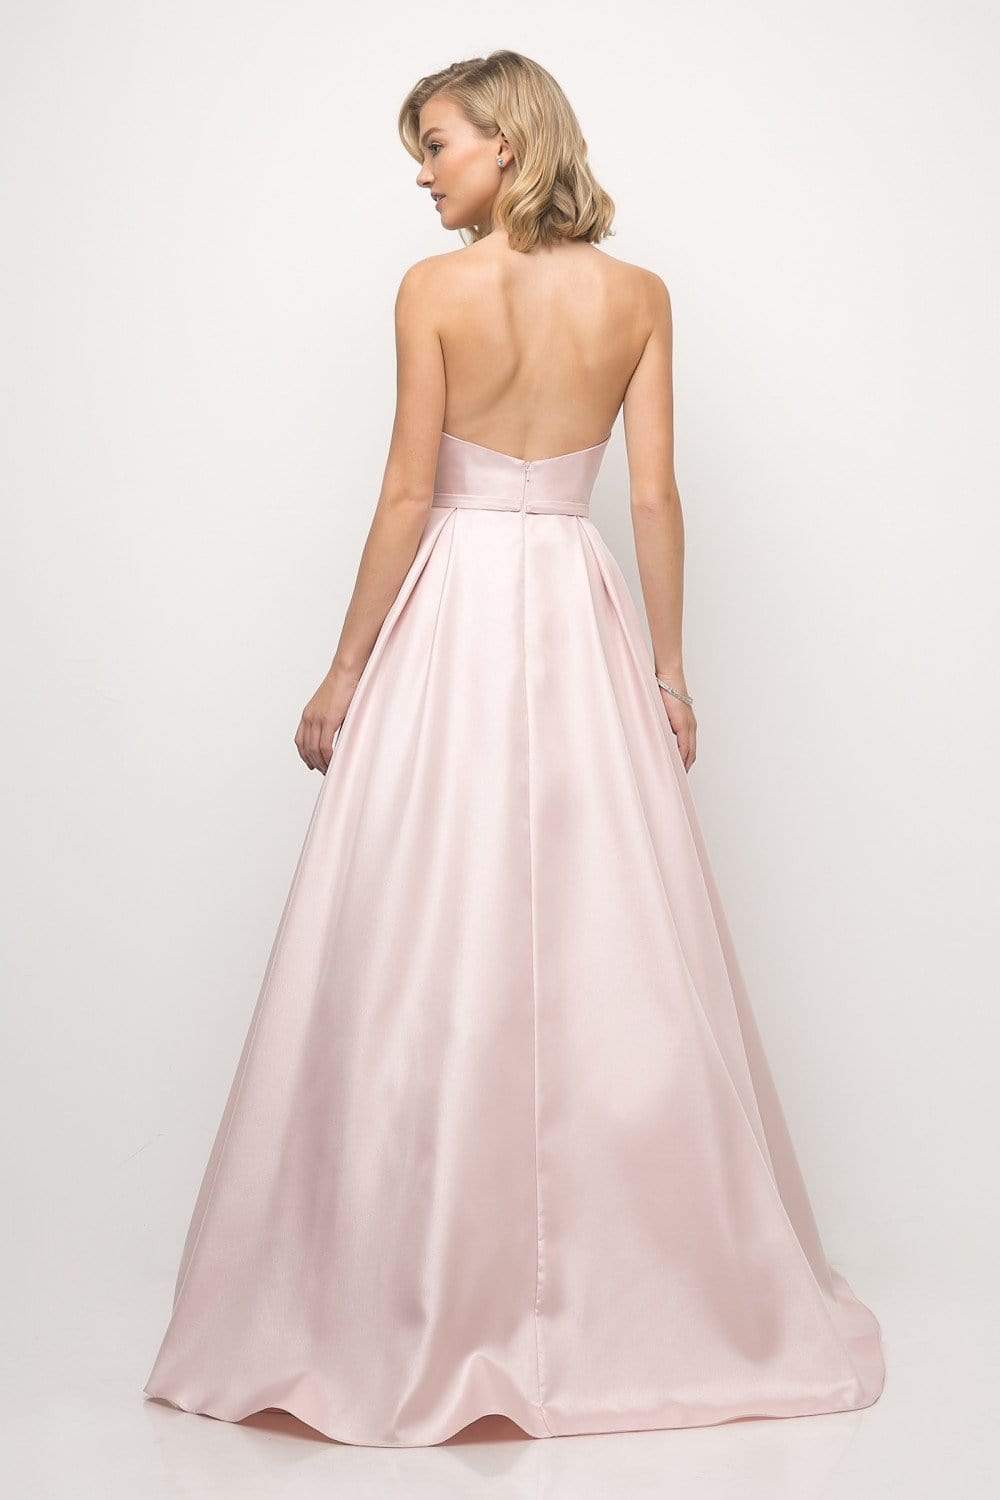 Cinderella Divine - UE008 Strapless Pointed Sweetheart Neck Backless Ballgown Special Occasion Dress